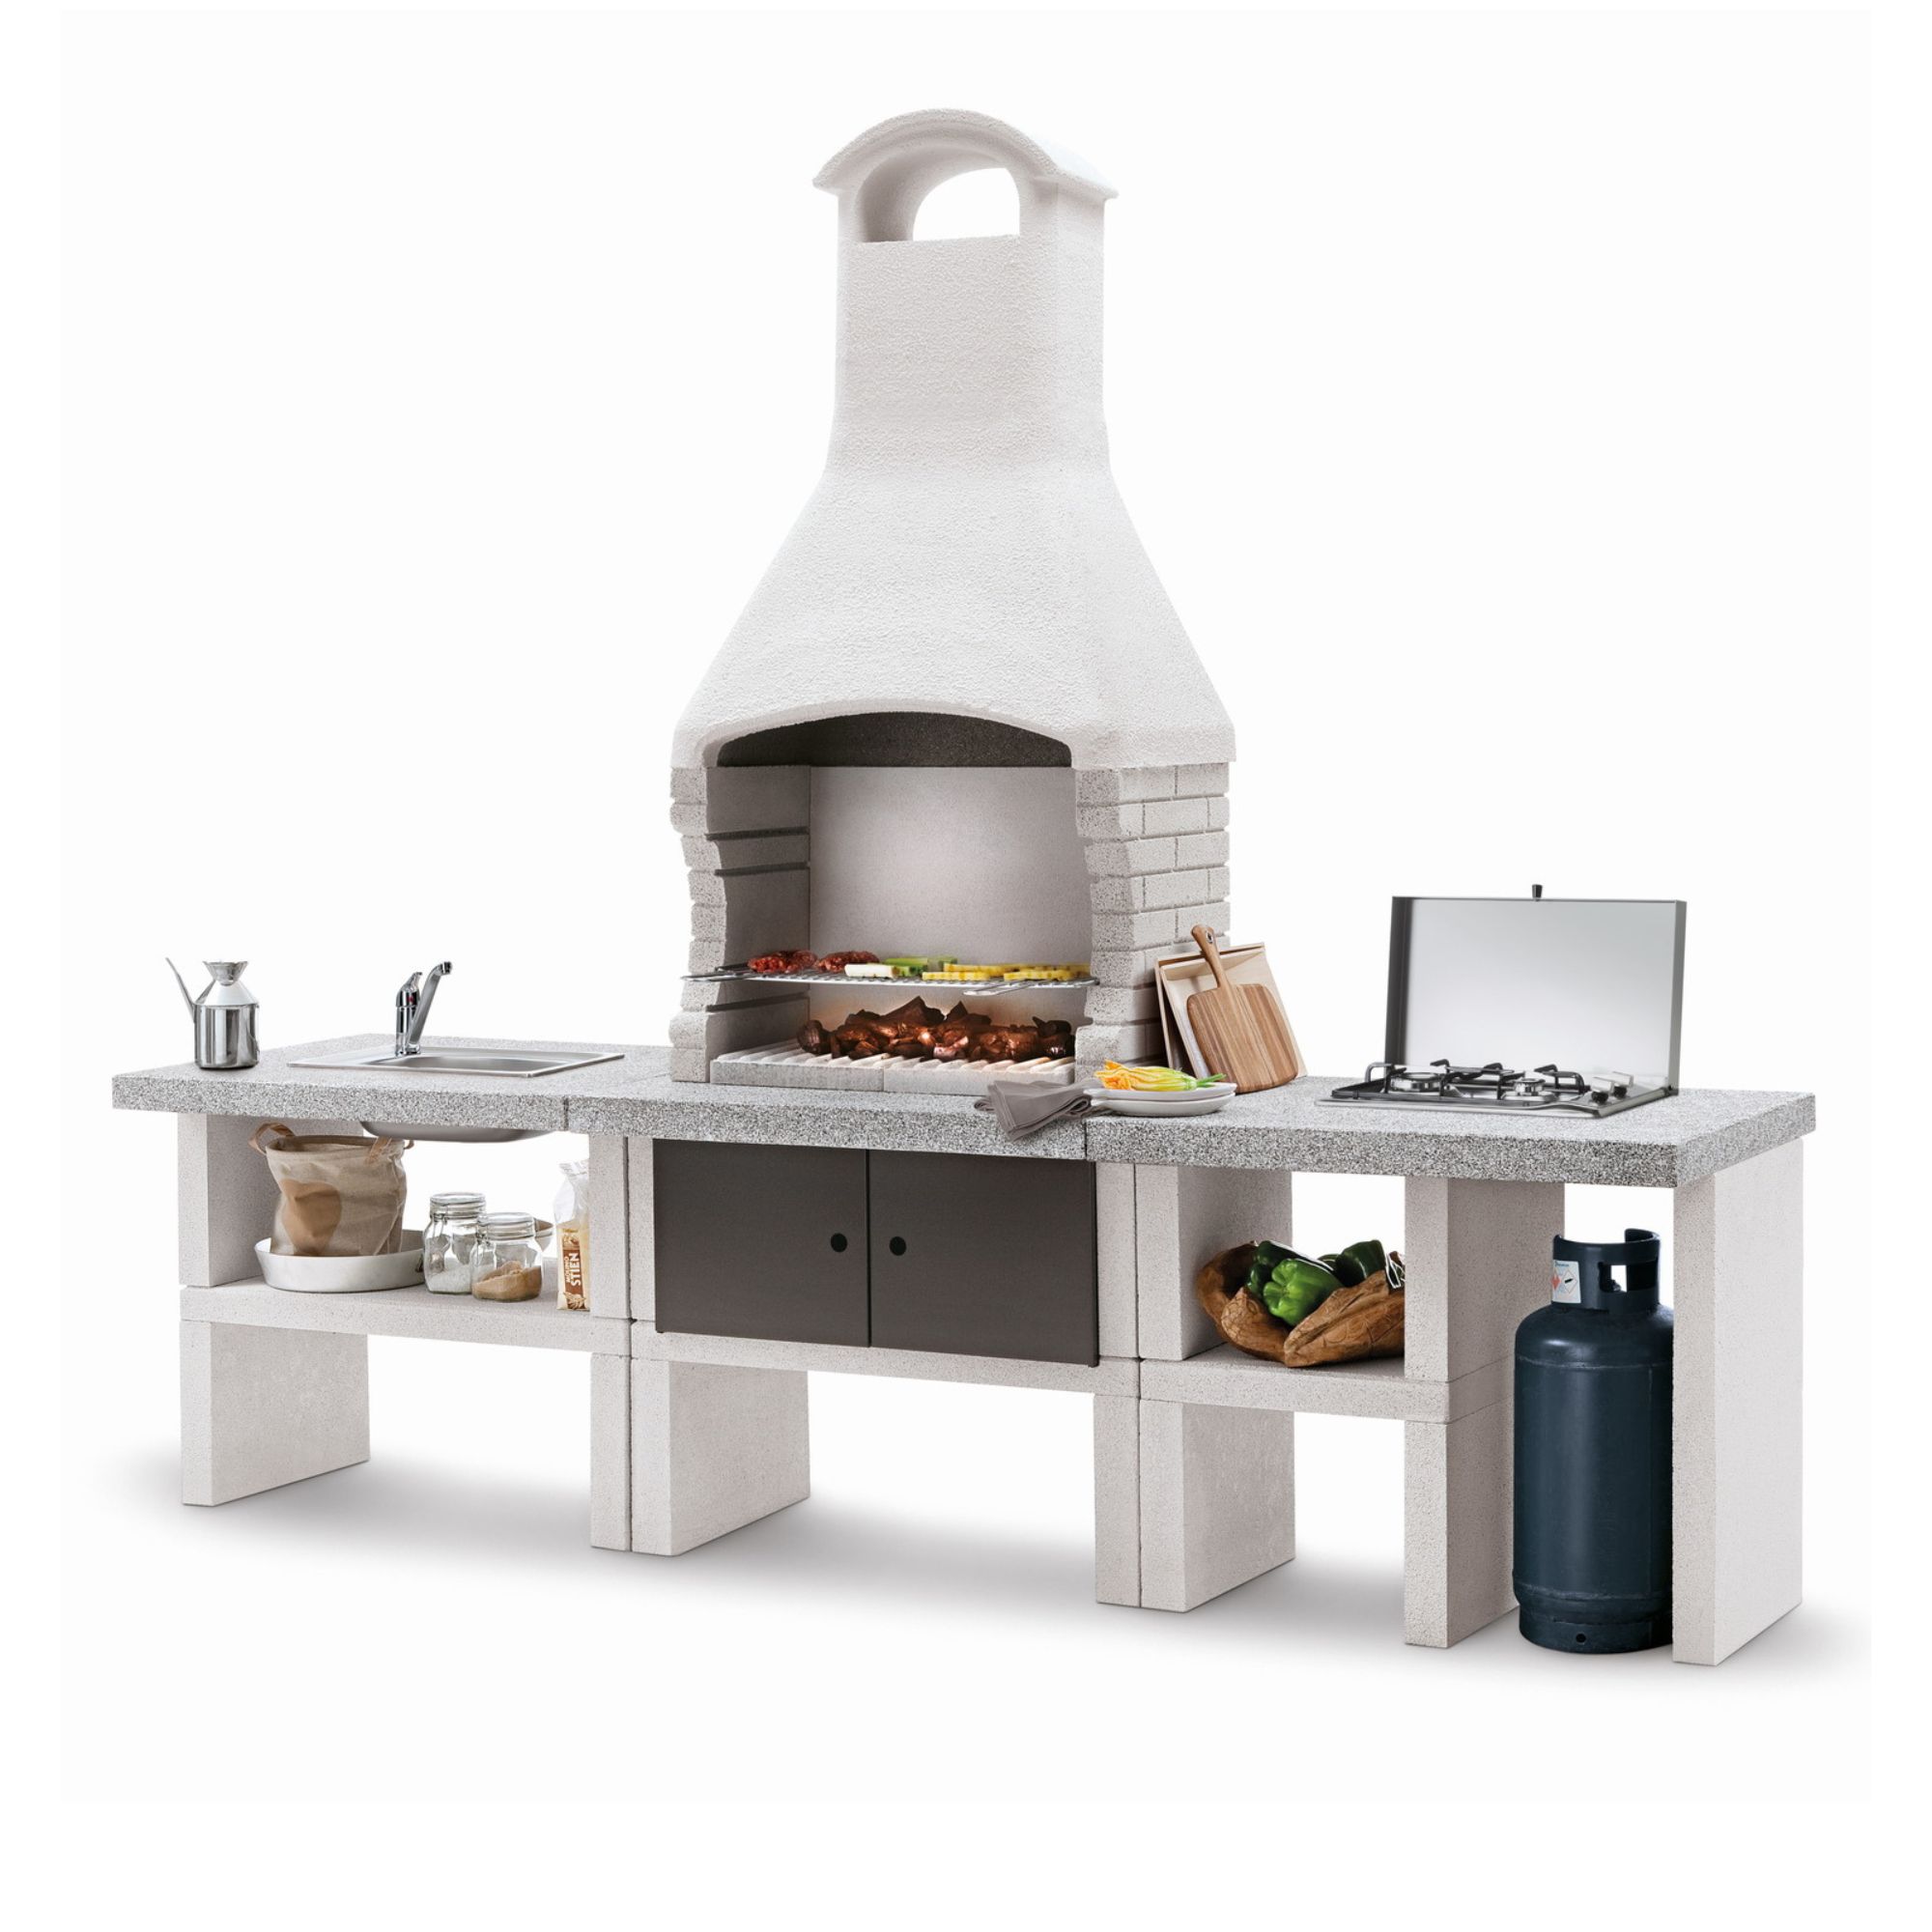 picture of Marbella Outdoor BBQ Kitchen